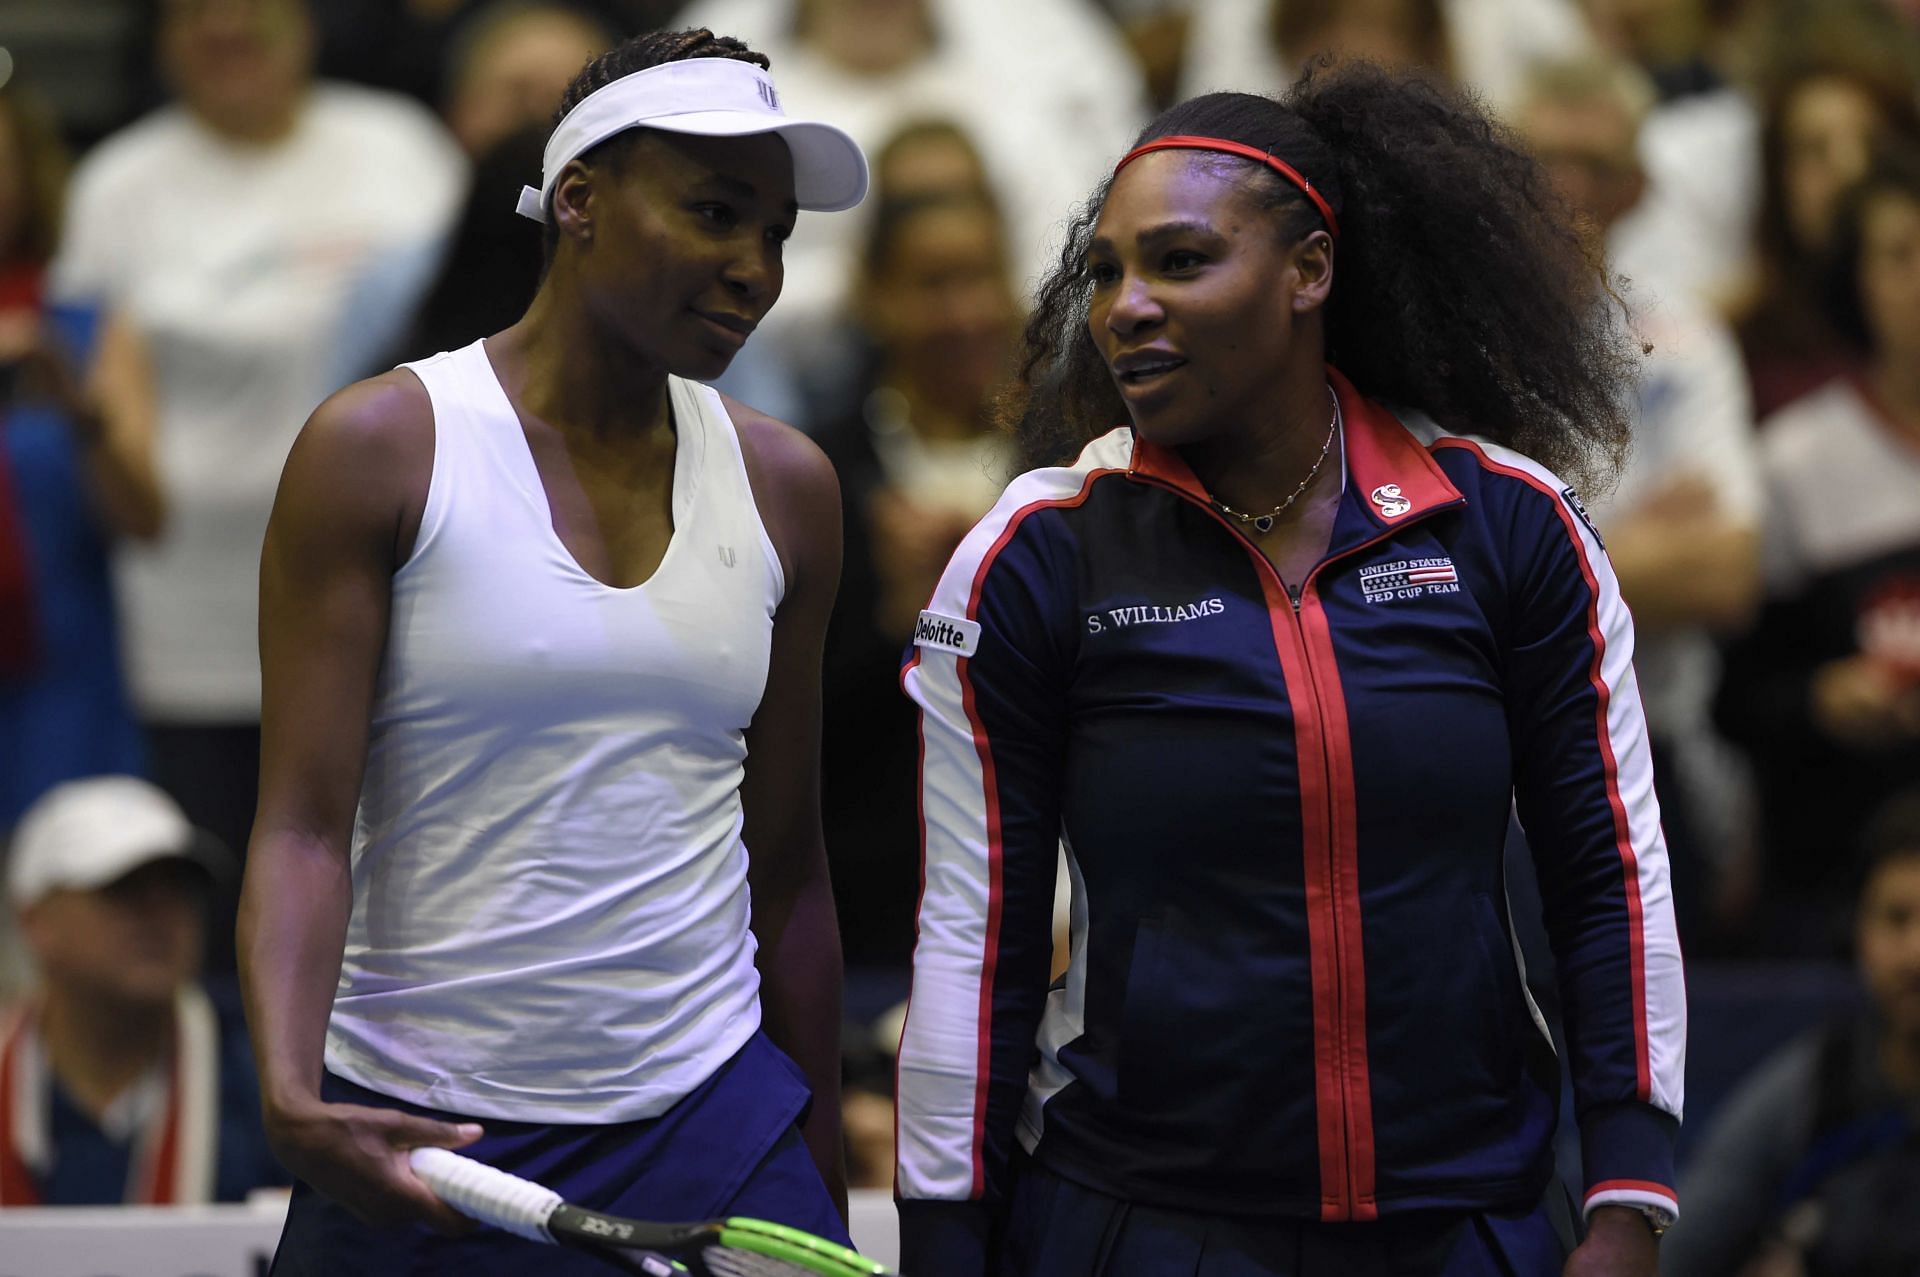 Serena Williams has only one doubles title where she did not partner with sister Venus Williams